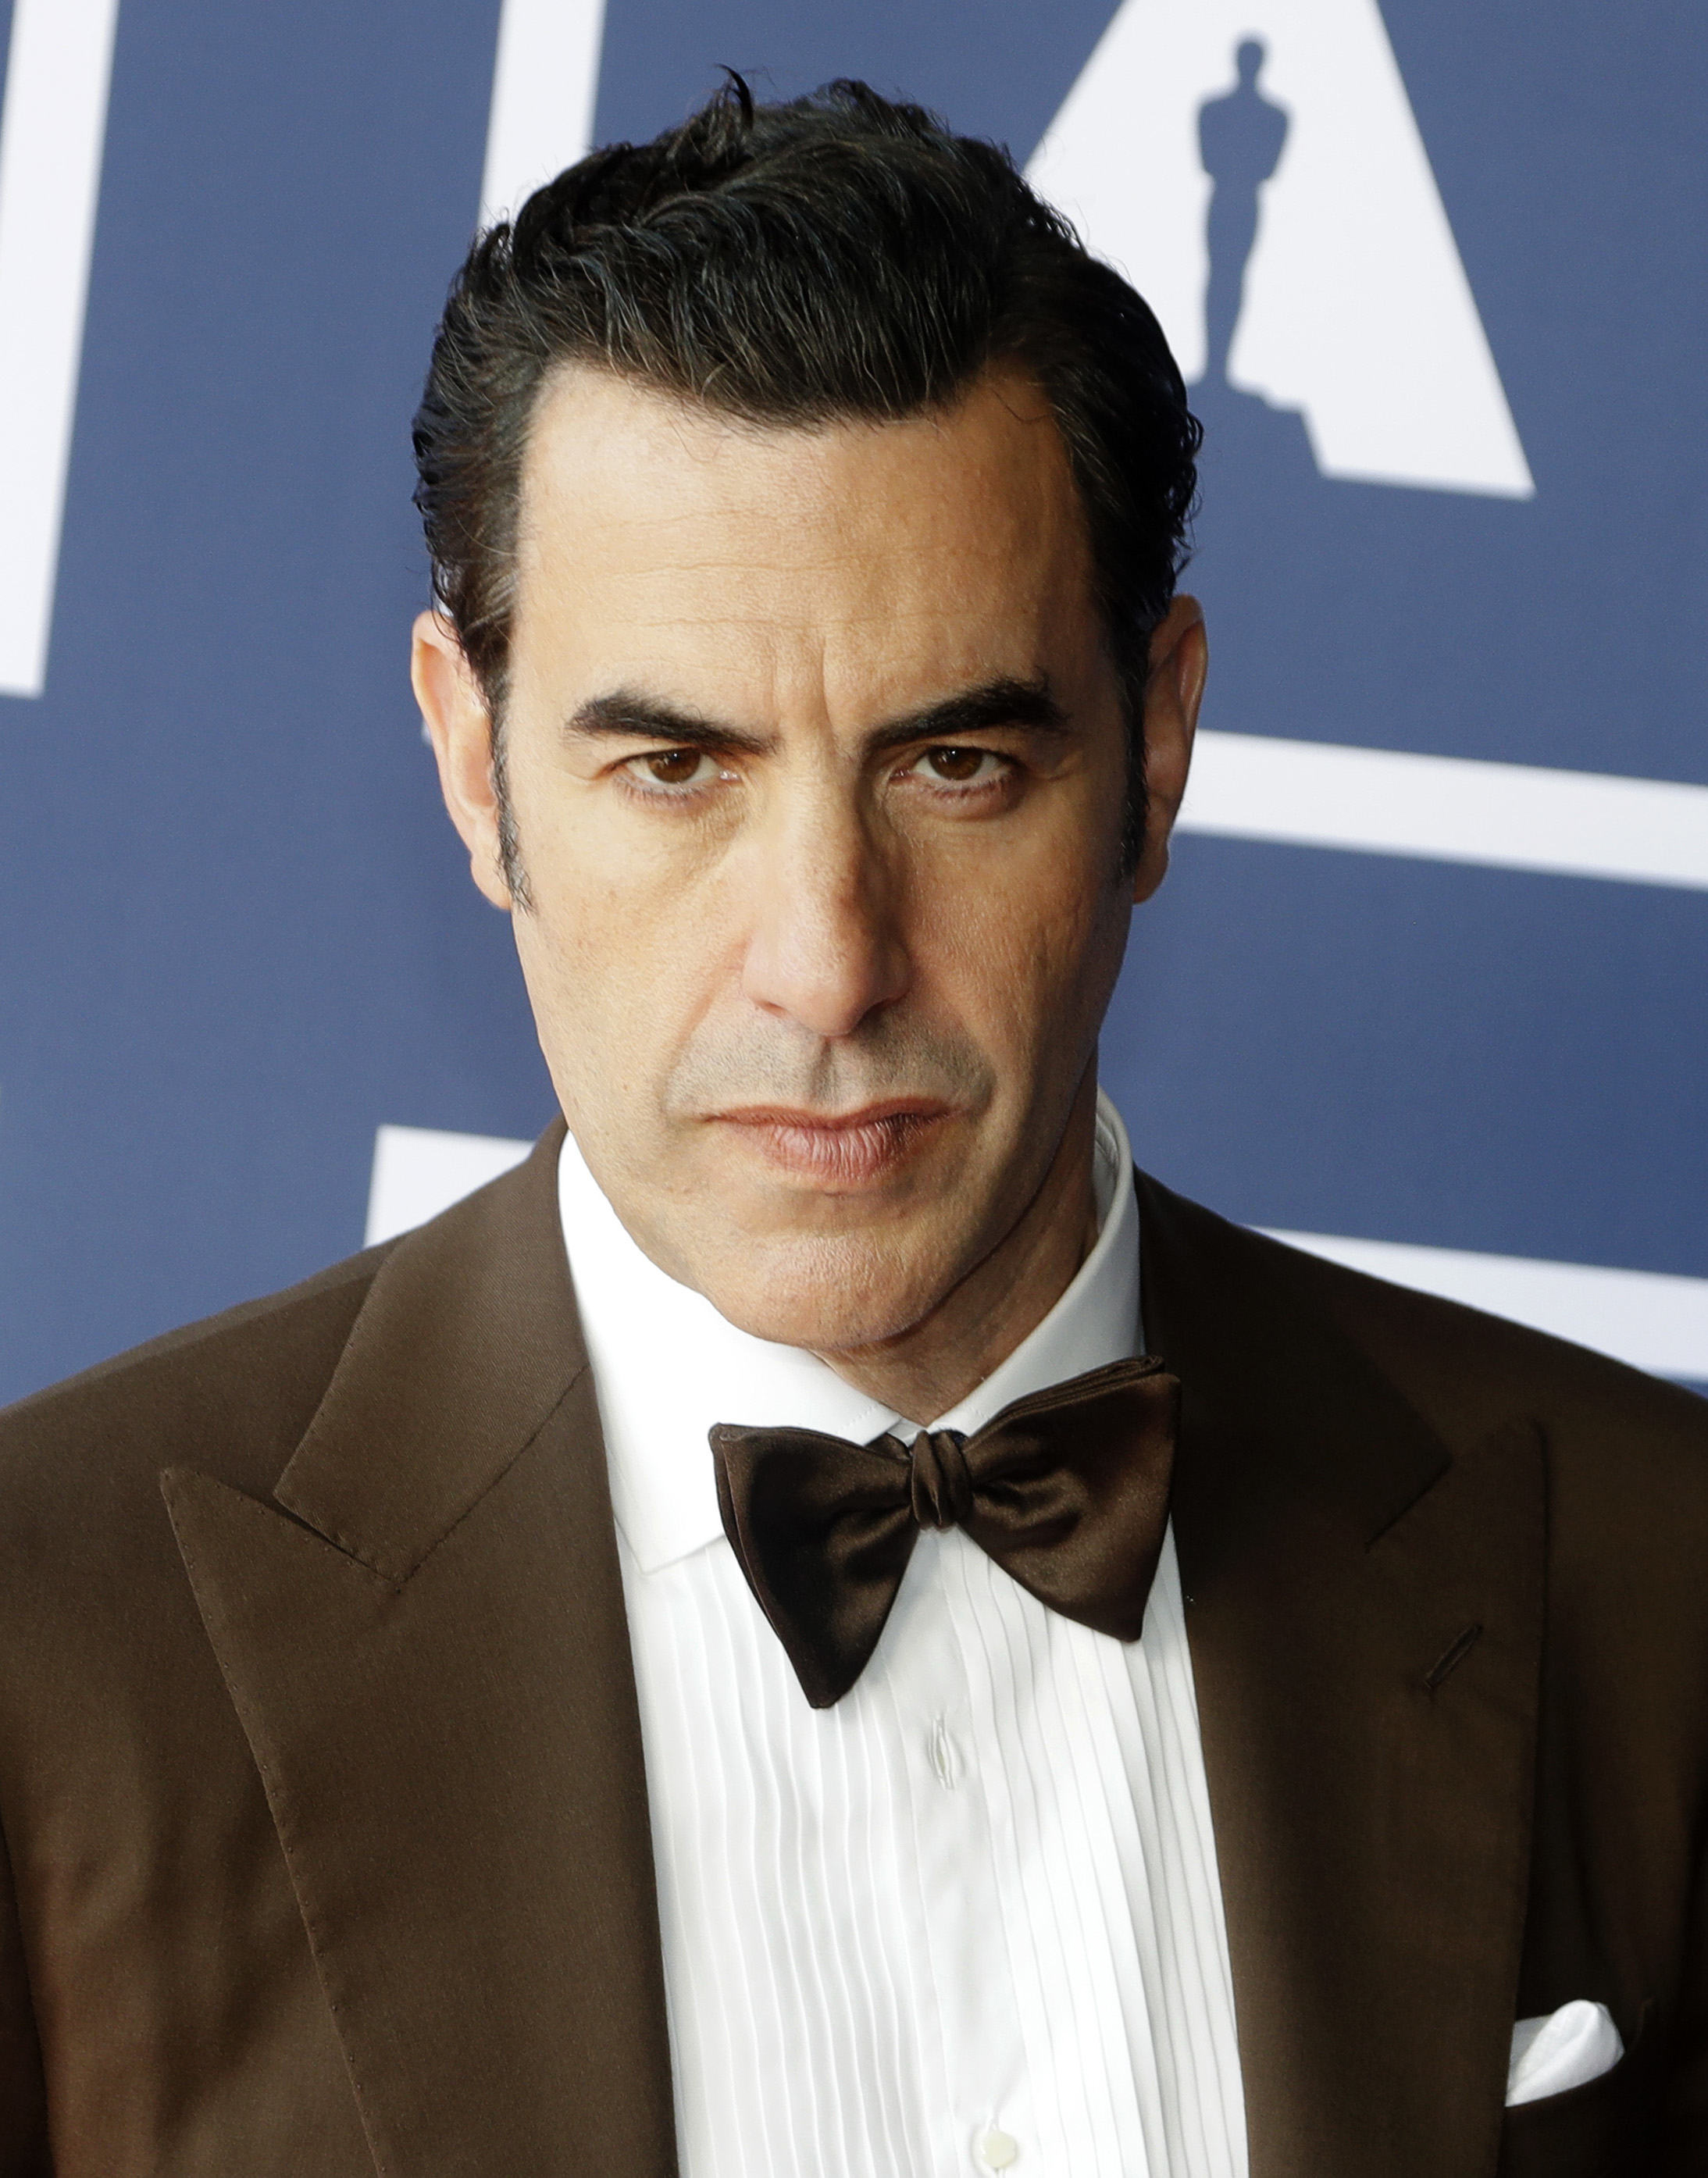 Sacha Baron Cohen in a dark suit and bow tie at an event